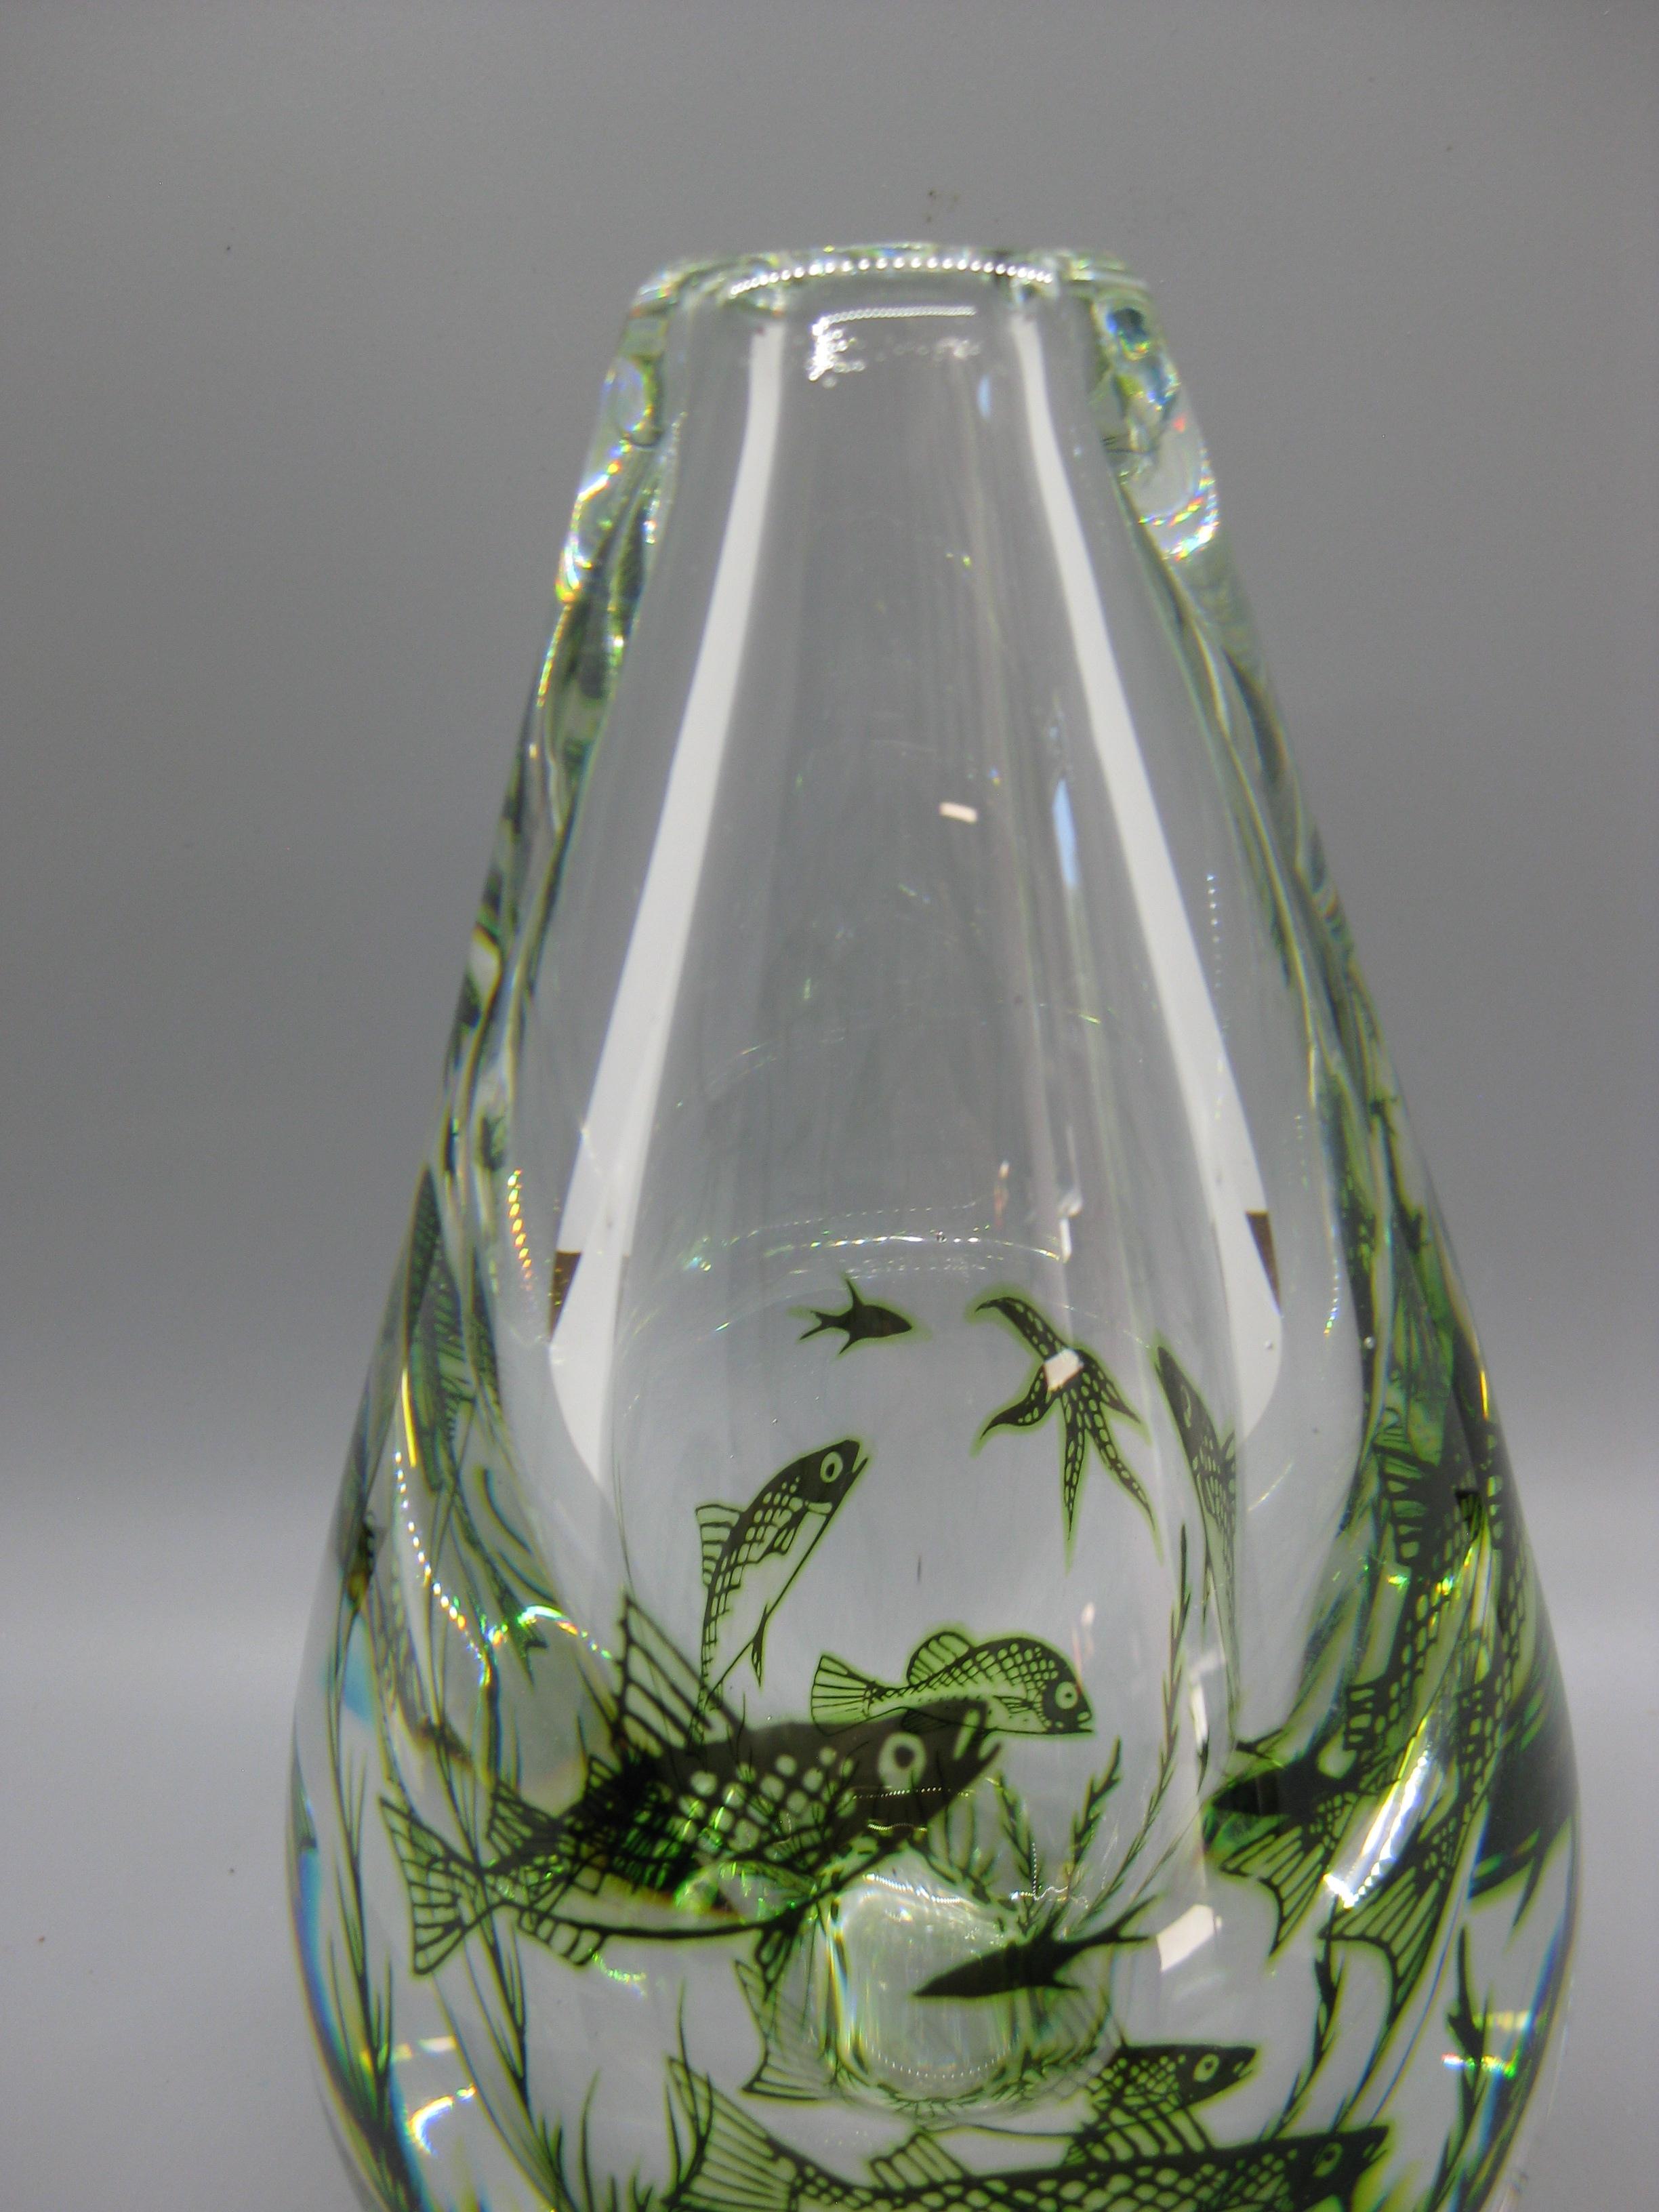 Wonderful Grall fish art glass vase Edward Hald for Orrefors and dates form the 1940's to early 1950's. Great design and form. Signed on the bottom by the artist. In very nice condition for its age. There is a small surface blemish as seen in the